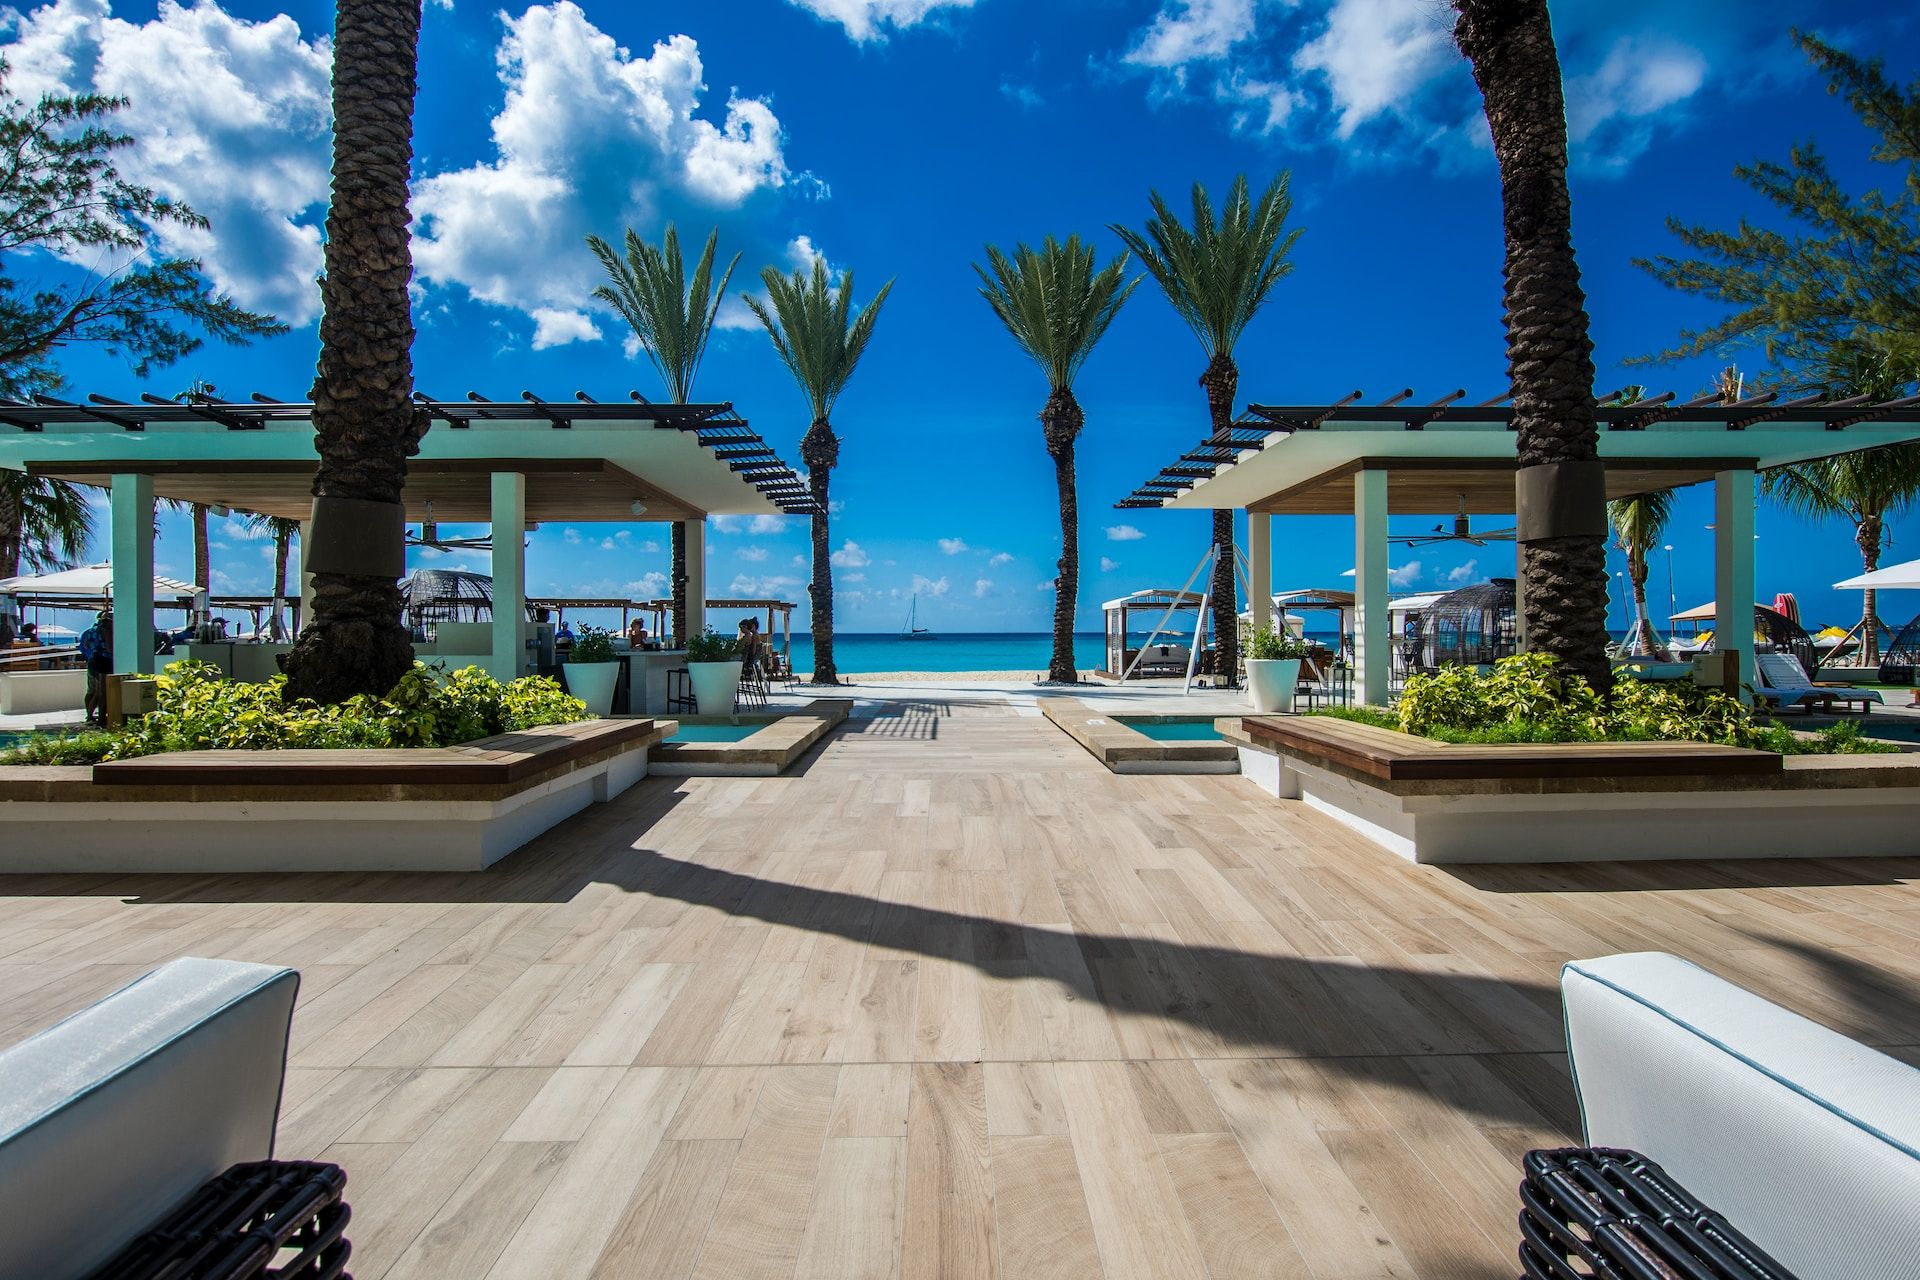 Luxurious resort at the Cayman Islands